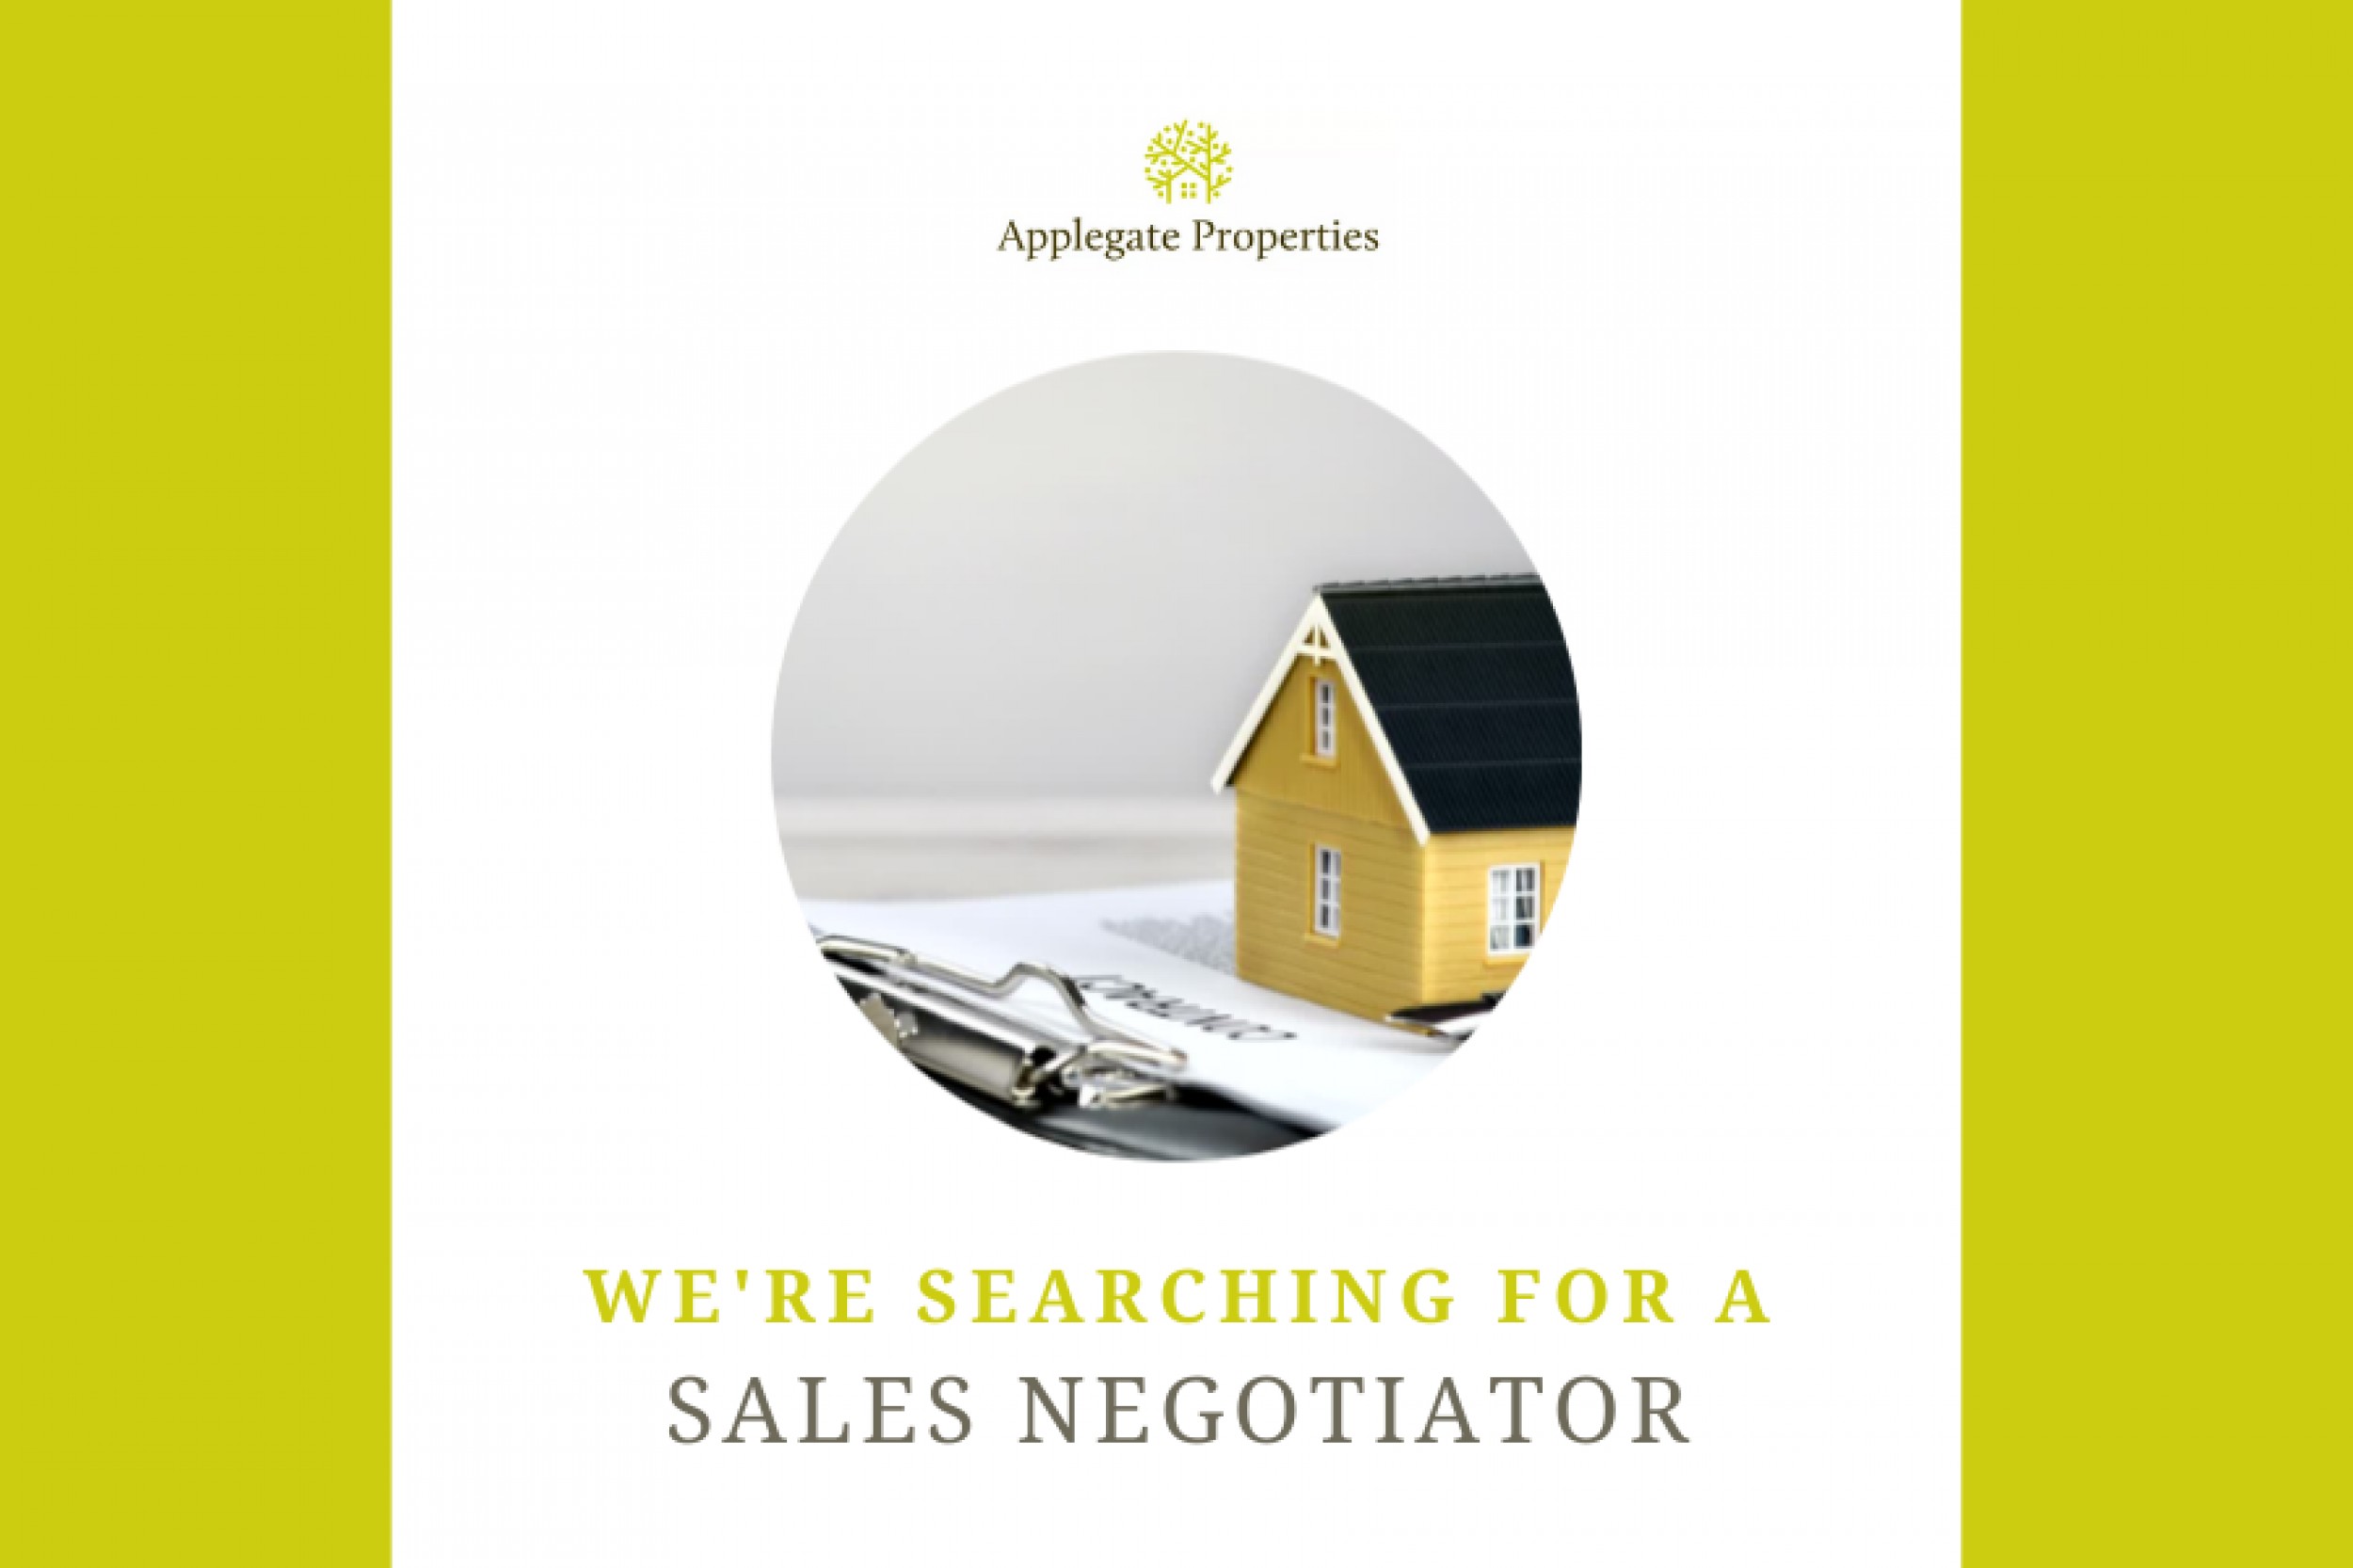 We're searching for a sales negotiator